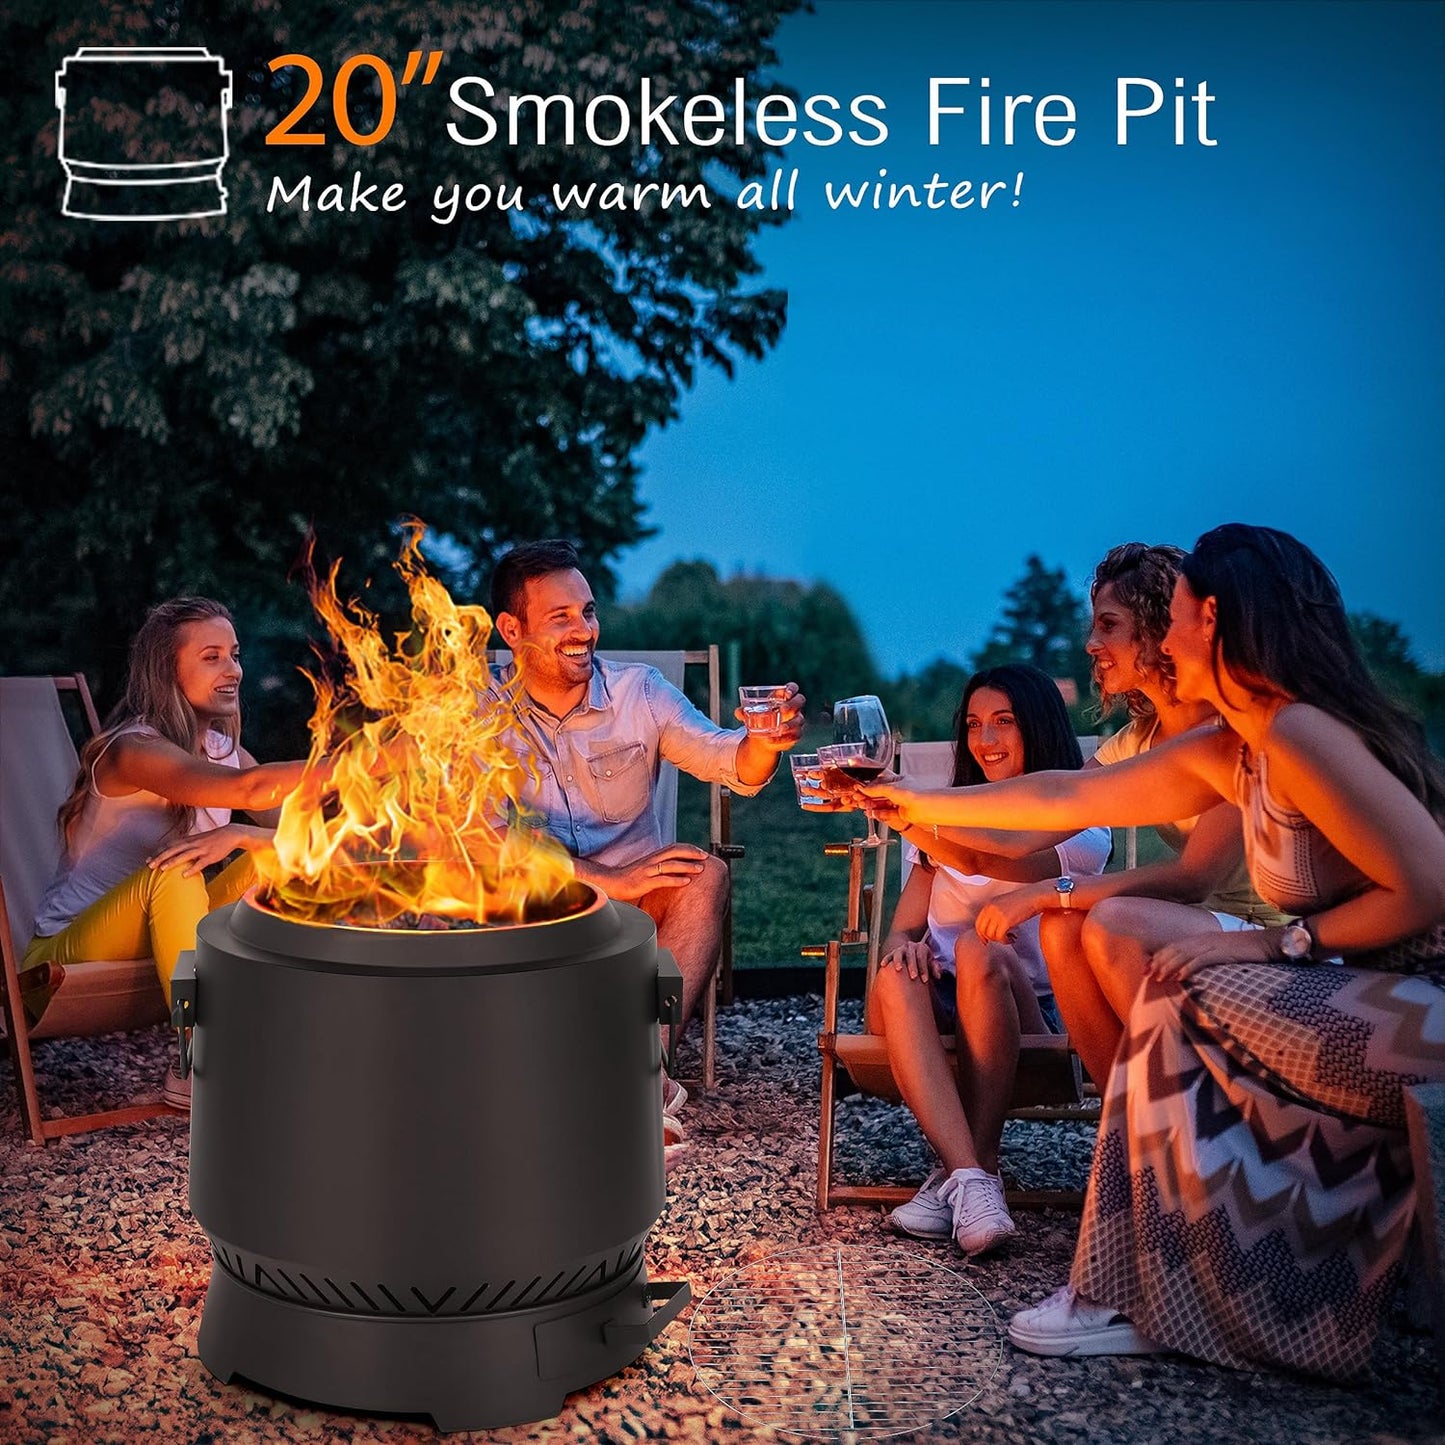 20'' Smokeless Fire Pit for Outside, Portable Bonfire Stove Outdoor Wood Burning Portable Firepit with Cooking Grill, Removable Ash Tray &Poker, Ideal for Outdoor Camping Backyard Patio